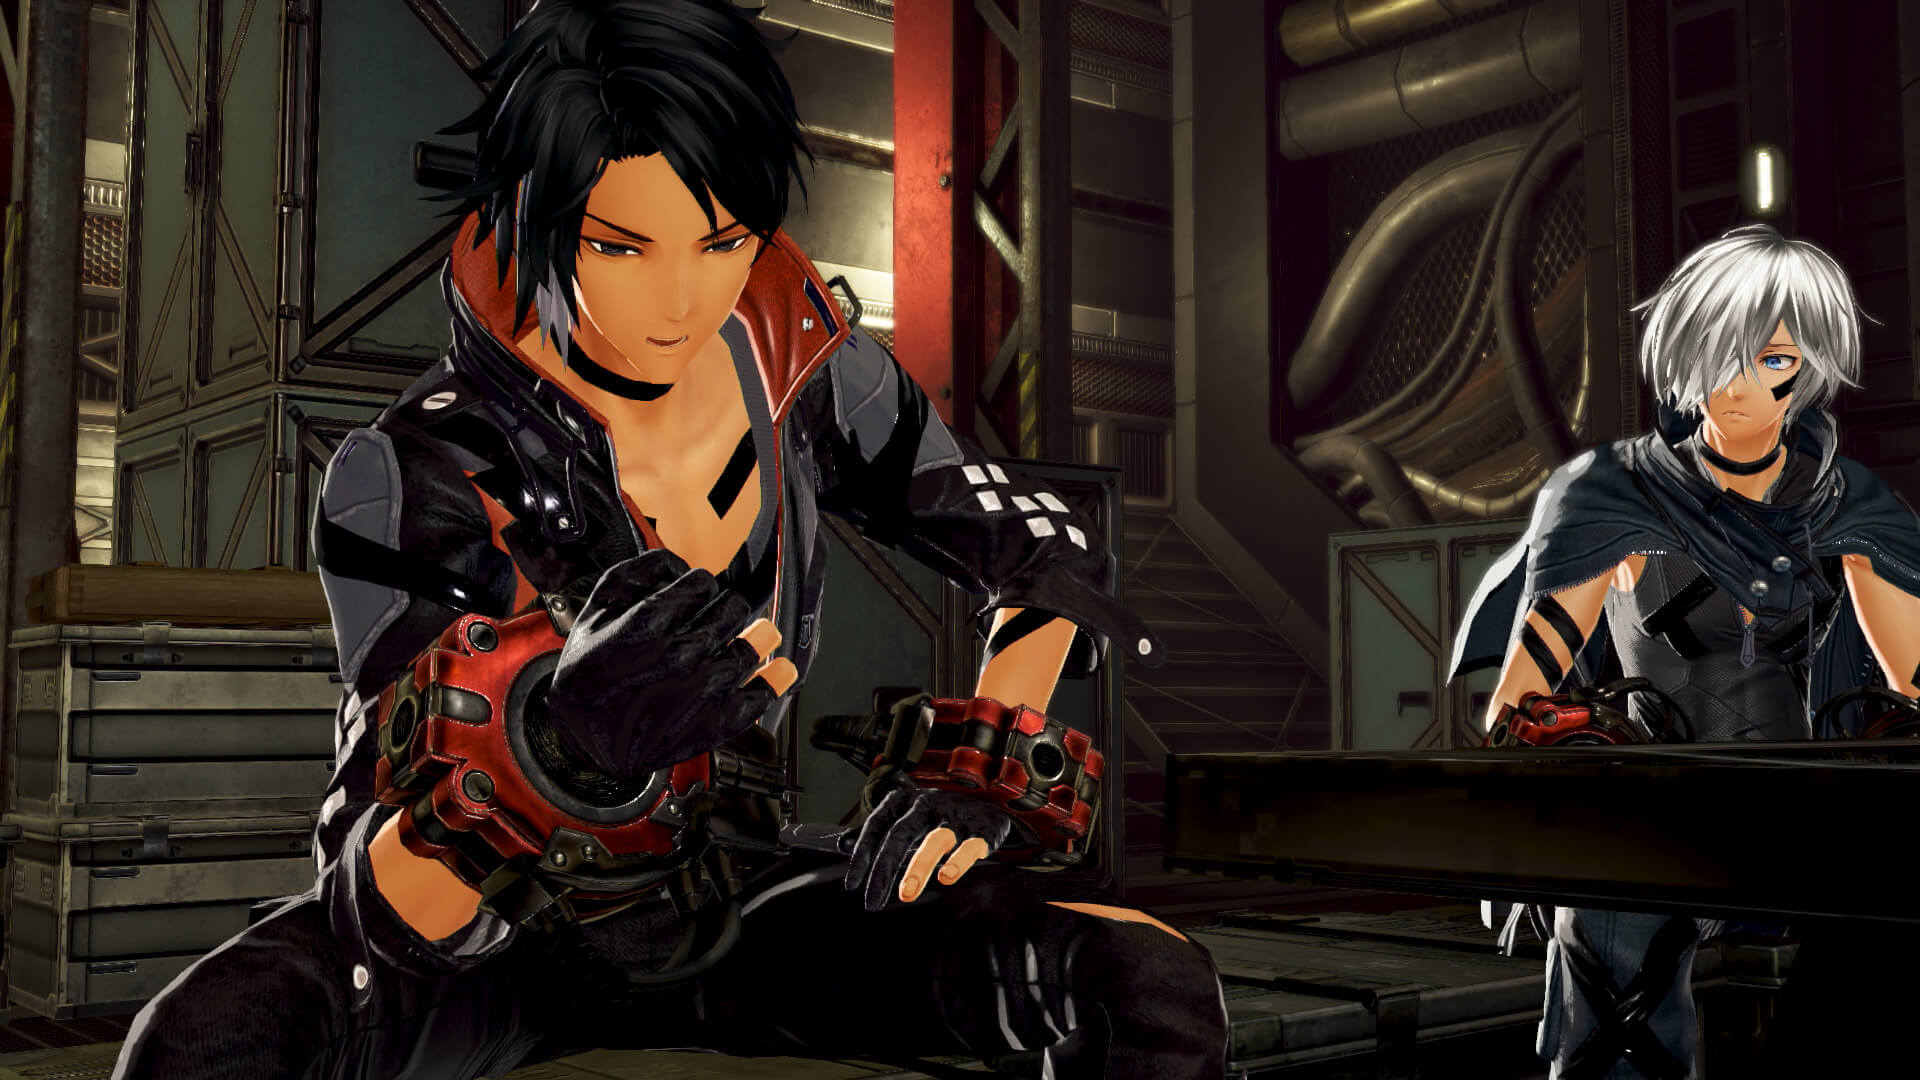 God Eater 3 version 2.10 and 2.11 updates now live